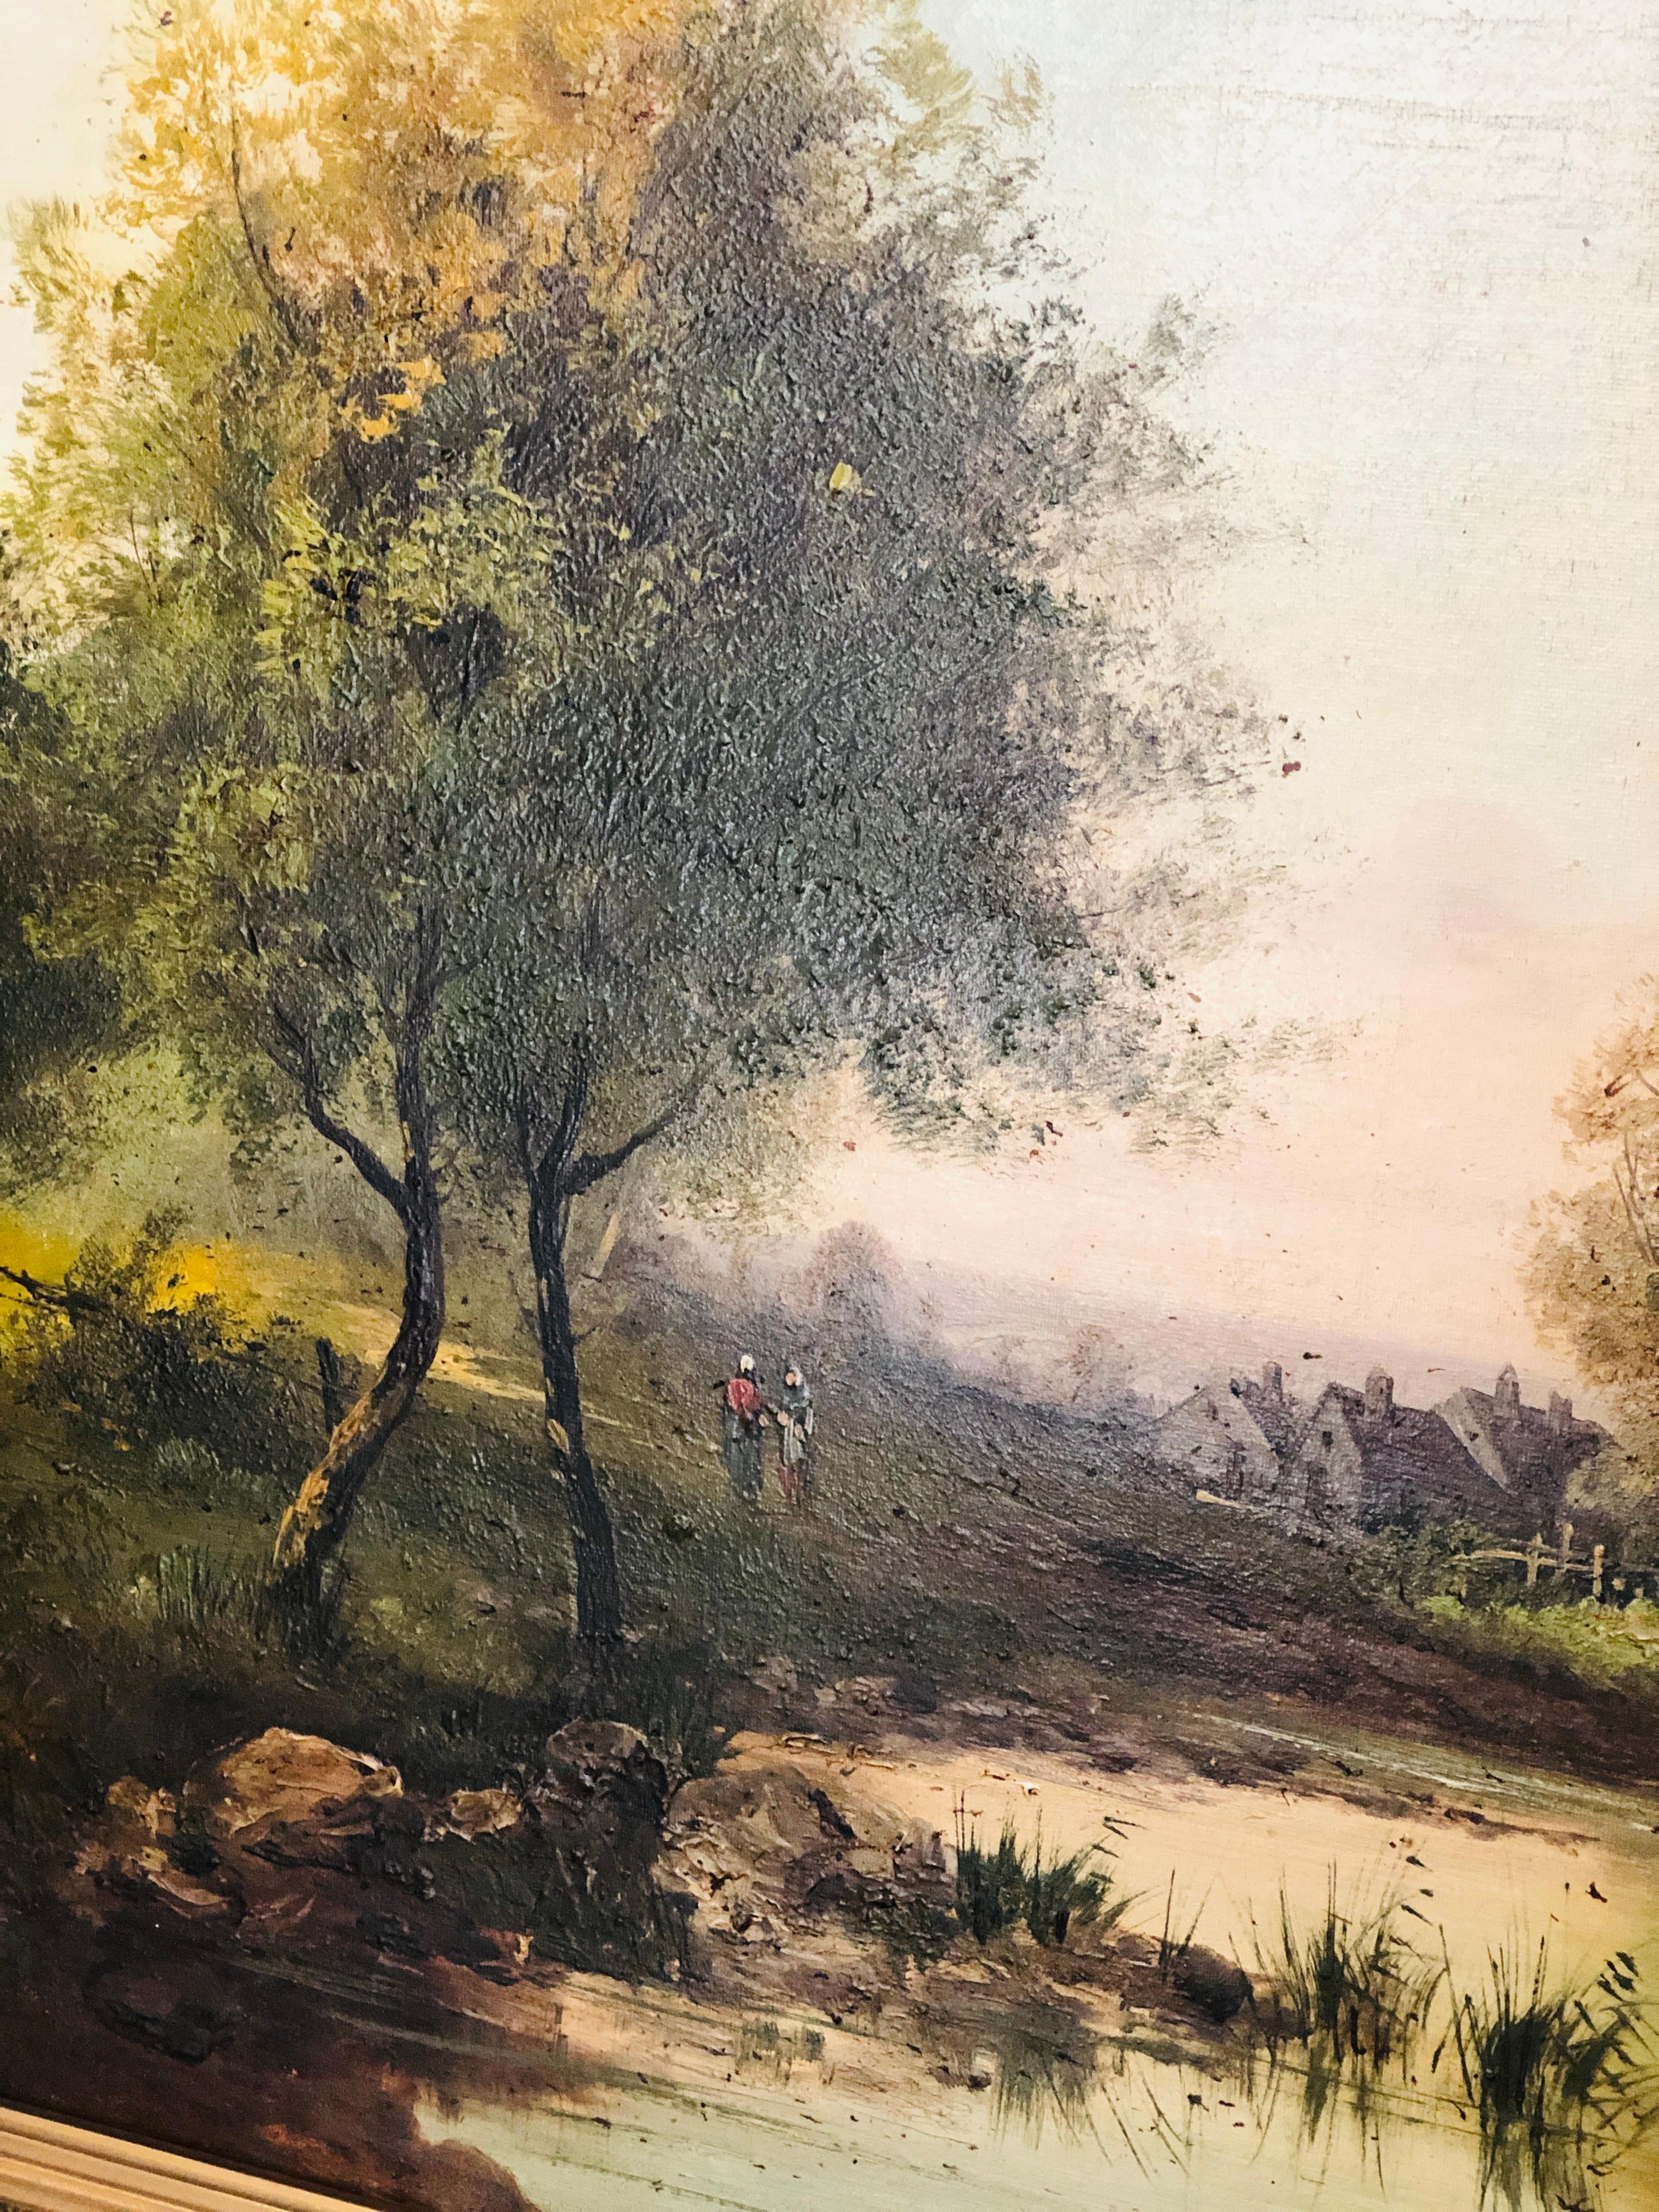 Large painting by the French artist Alphonse Levy.
The technic is oil on canvas and the piece is placed in its original frame.
Very good condition, signed lower at left.
France, mid-19th century.